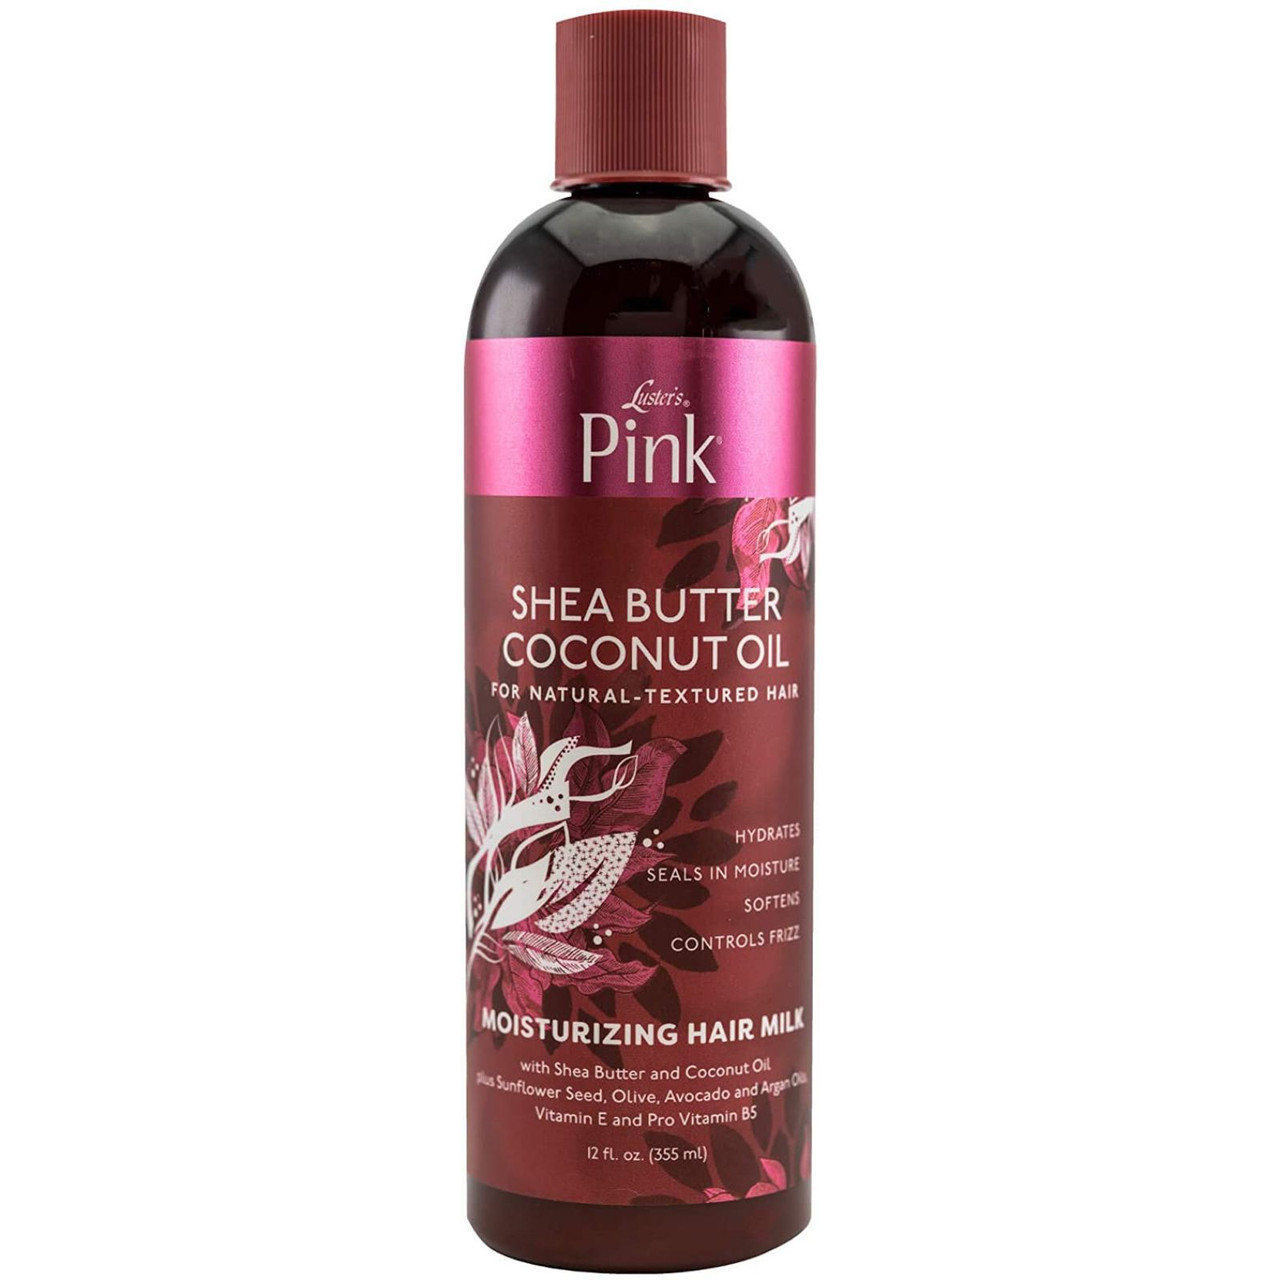 Luster's | Pink! Shea Butter and Coconut Oil | Moisturizing Hair Milk (12oz)